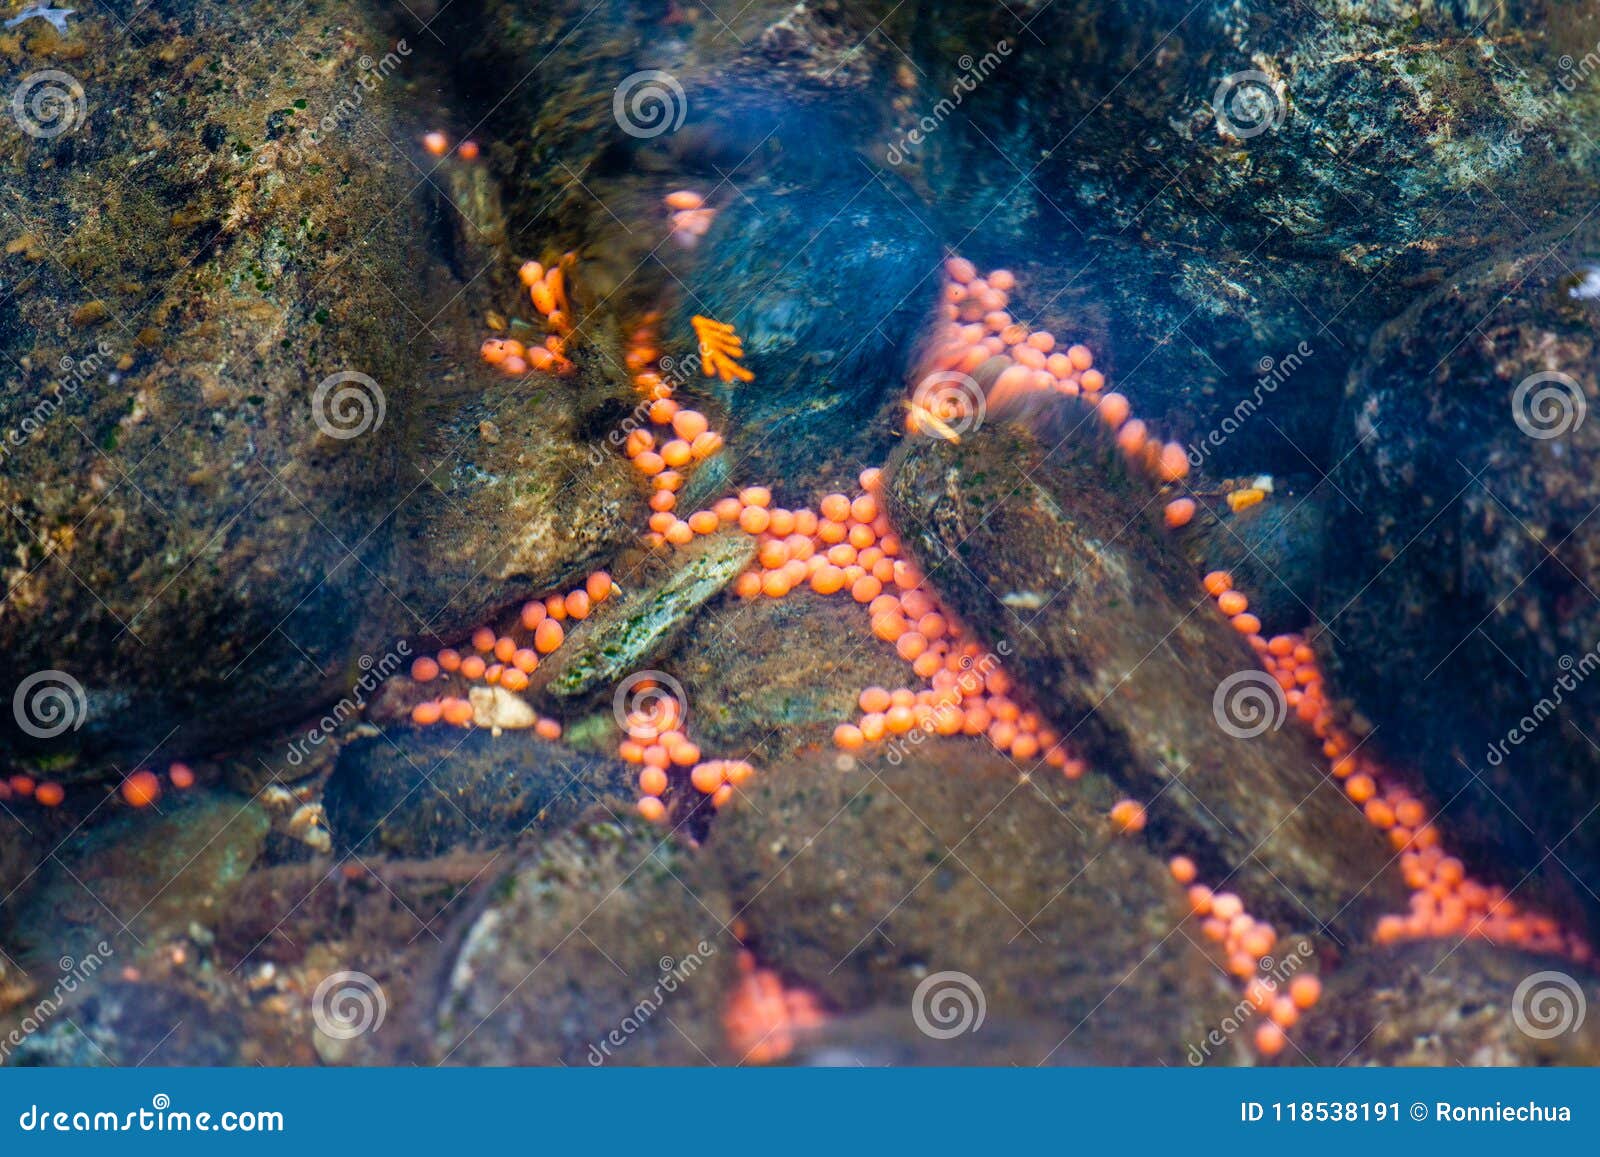 Salmon Eggs in the Adams River, BC, Canada Stock Image - Image of